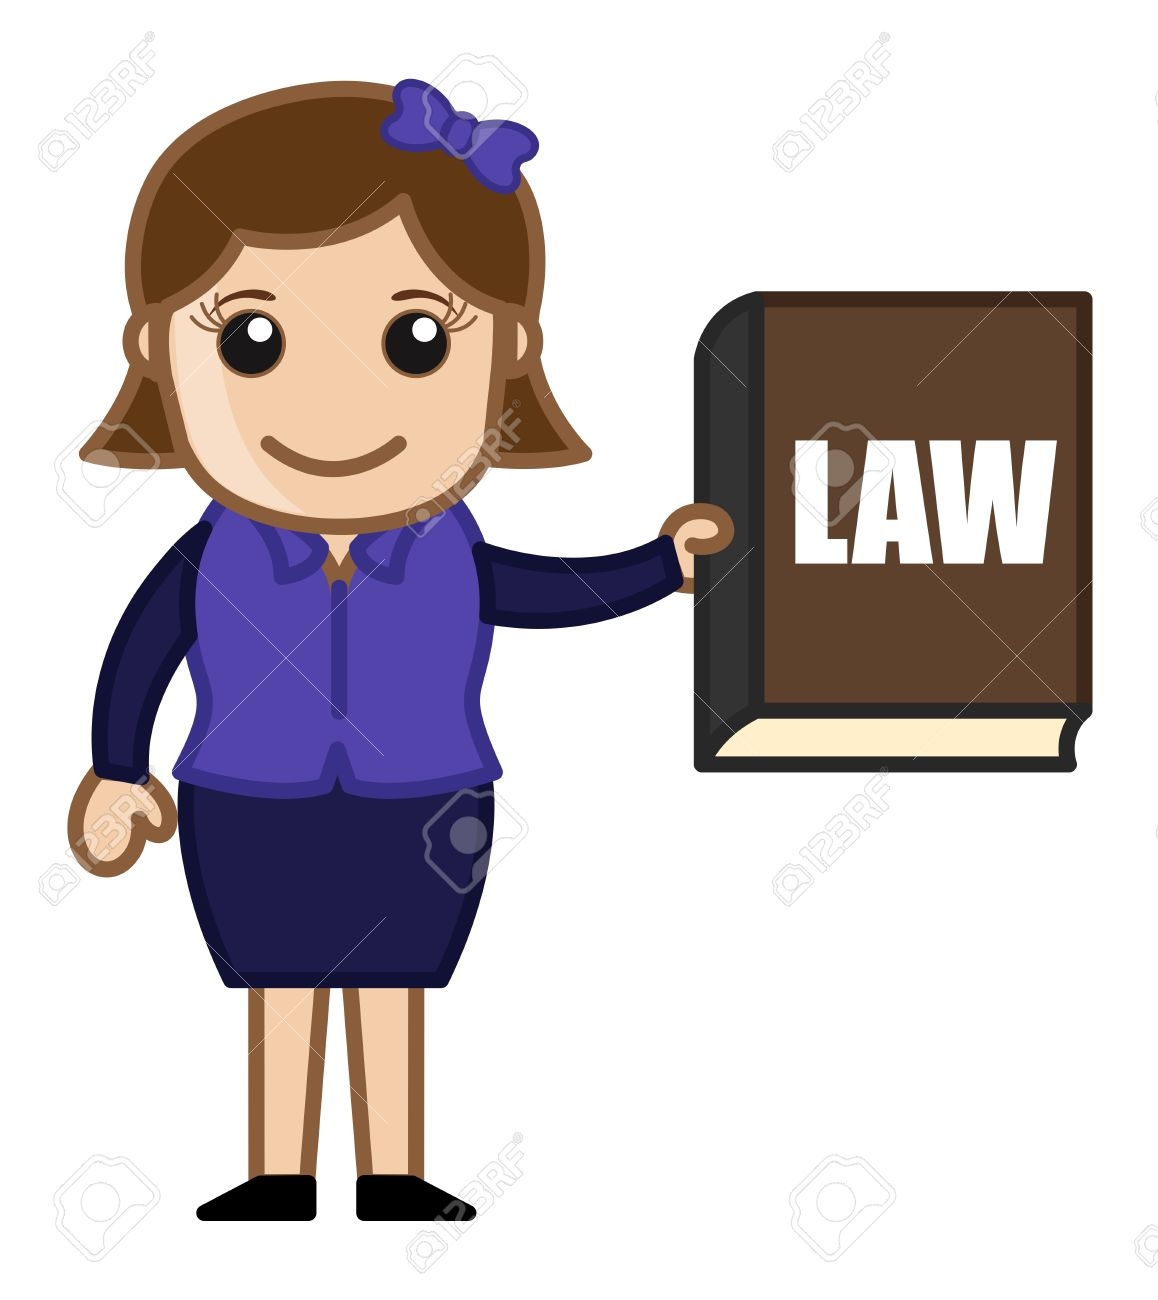 Lawyer clipart. Unique gallery digital collection